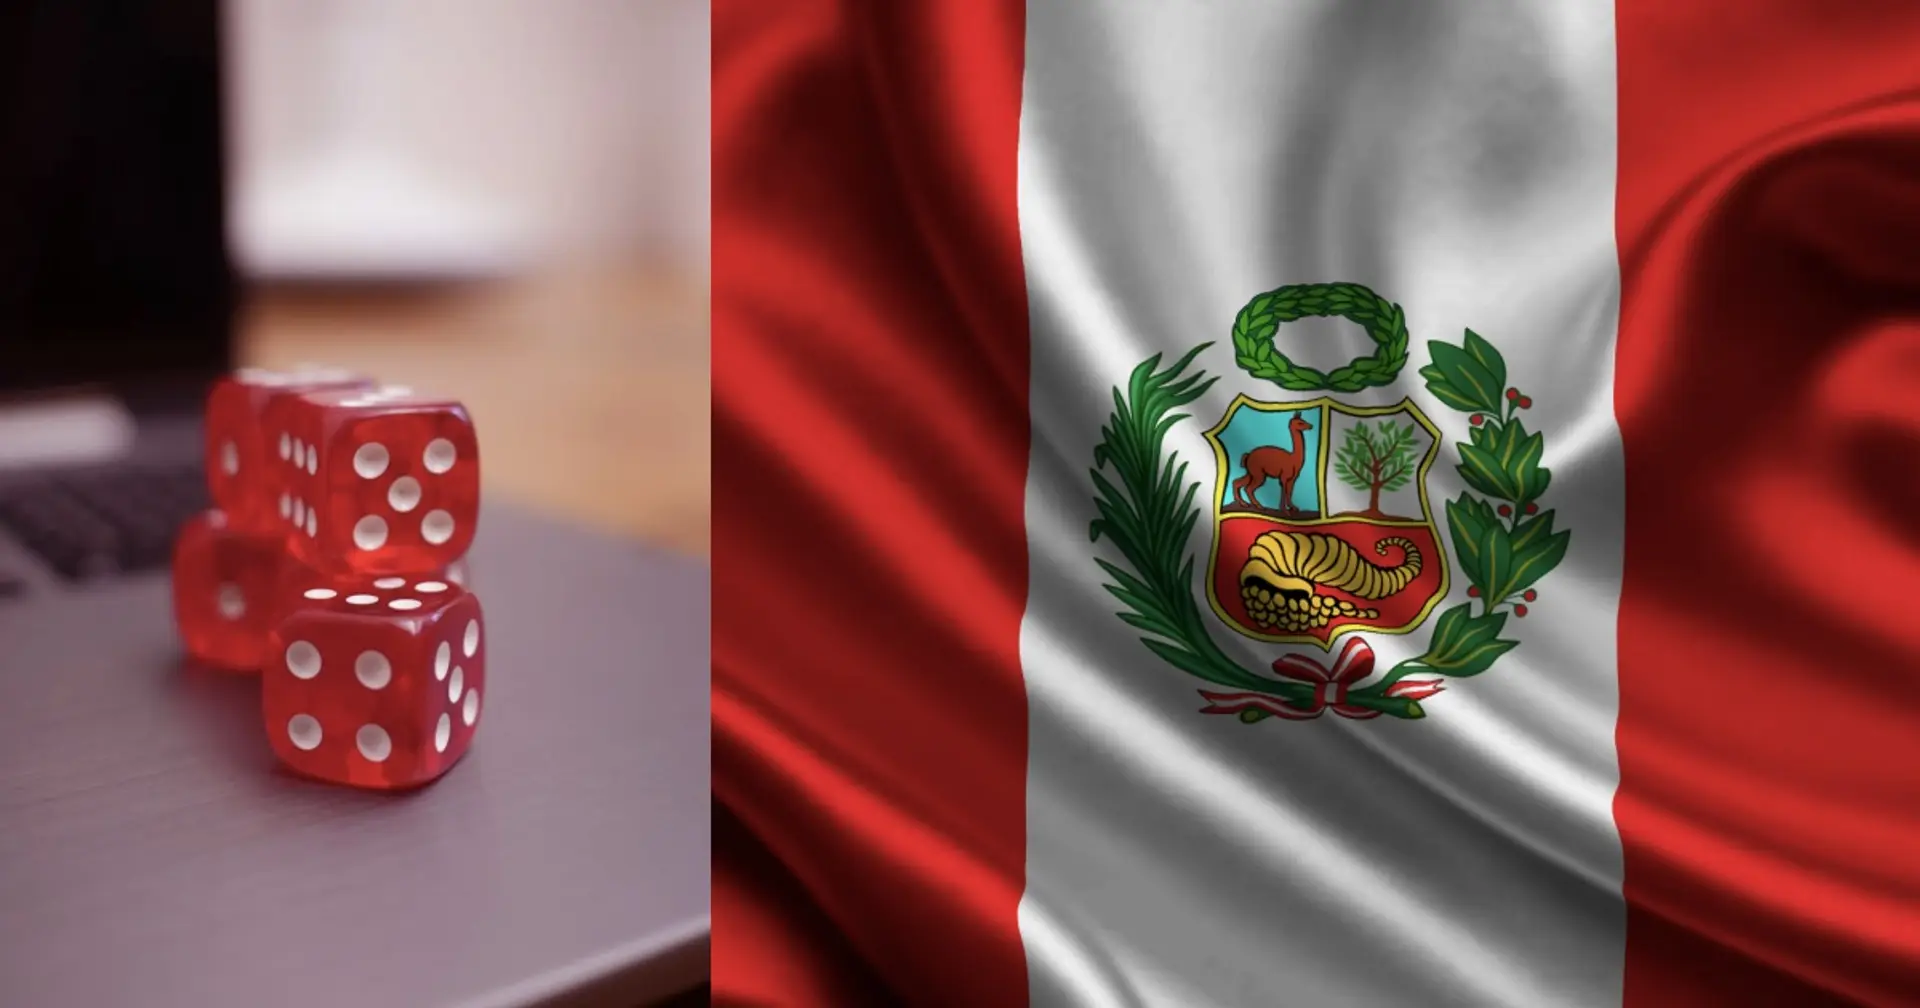 145 online gambling licence applications filed in Peru in just 30 days following new regulating law